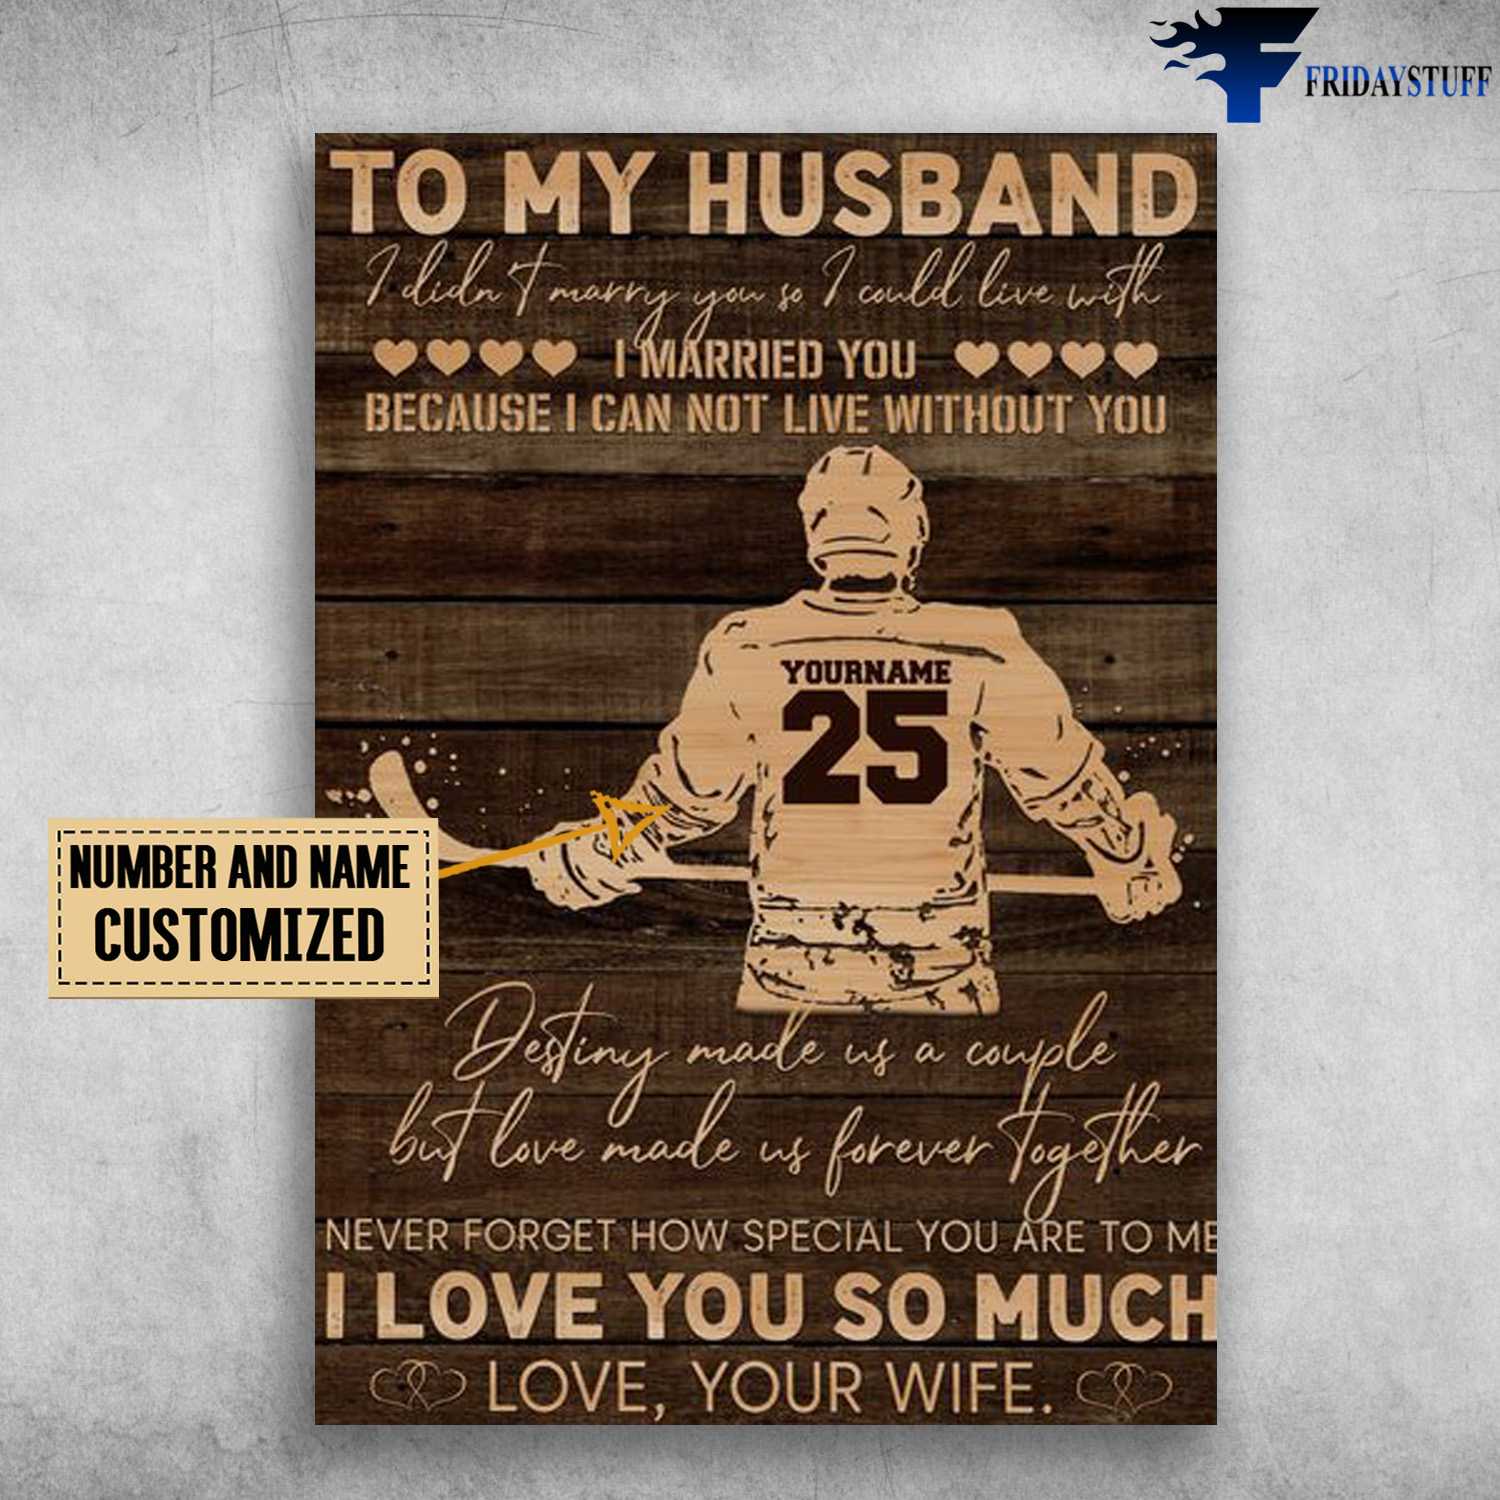 Hockey Husband, Husband And Wife, To My Husband, I Didn't Marry You, So I Could Live With, I Married You, Because I Can Not Live Without You, Desting Made Us A Couple